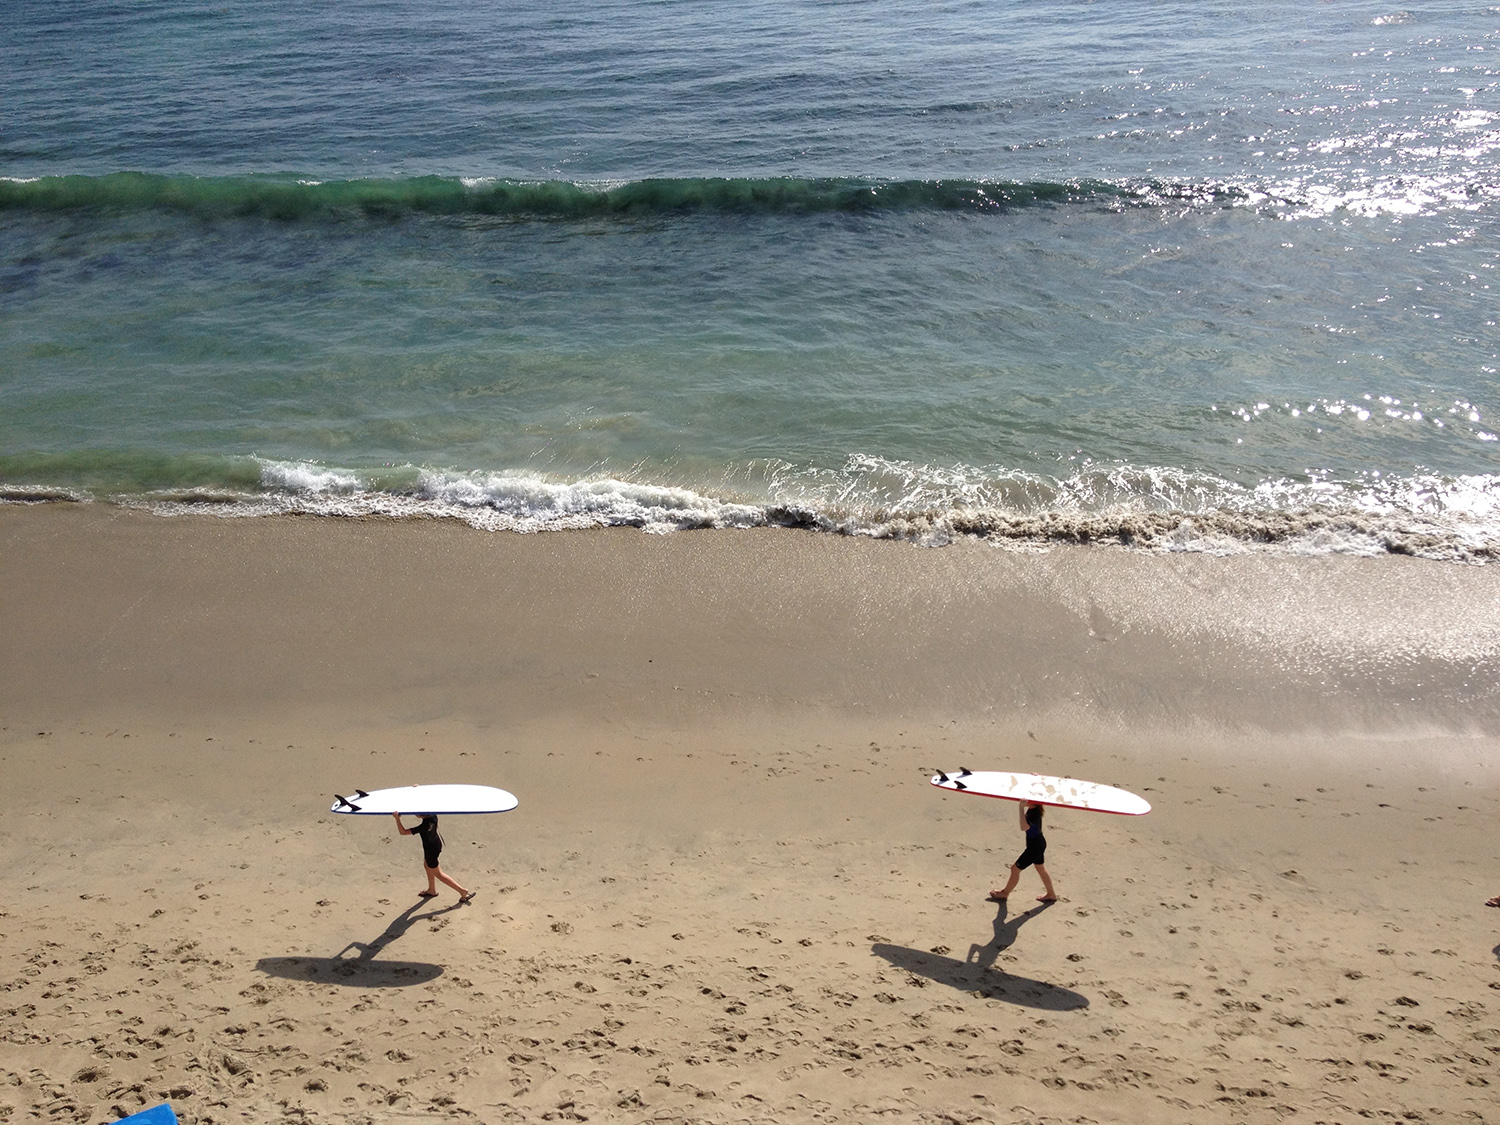 Two ladies walking on beach with surfboards balanced on their heads